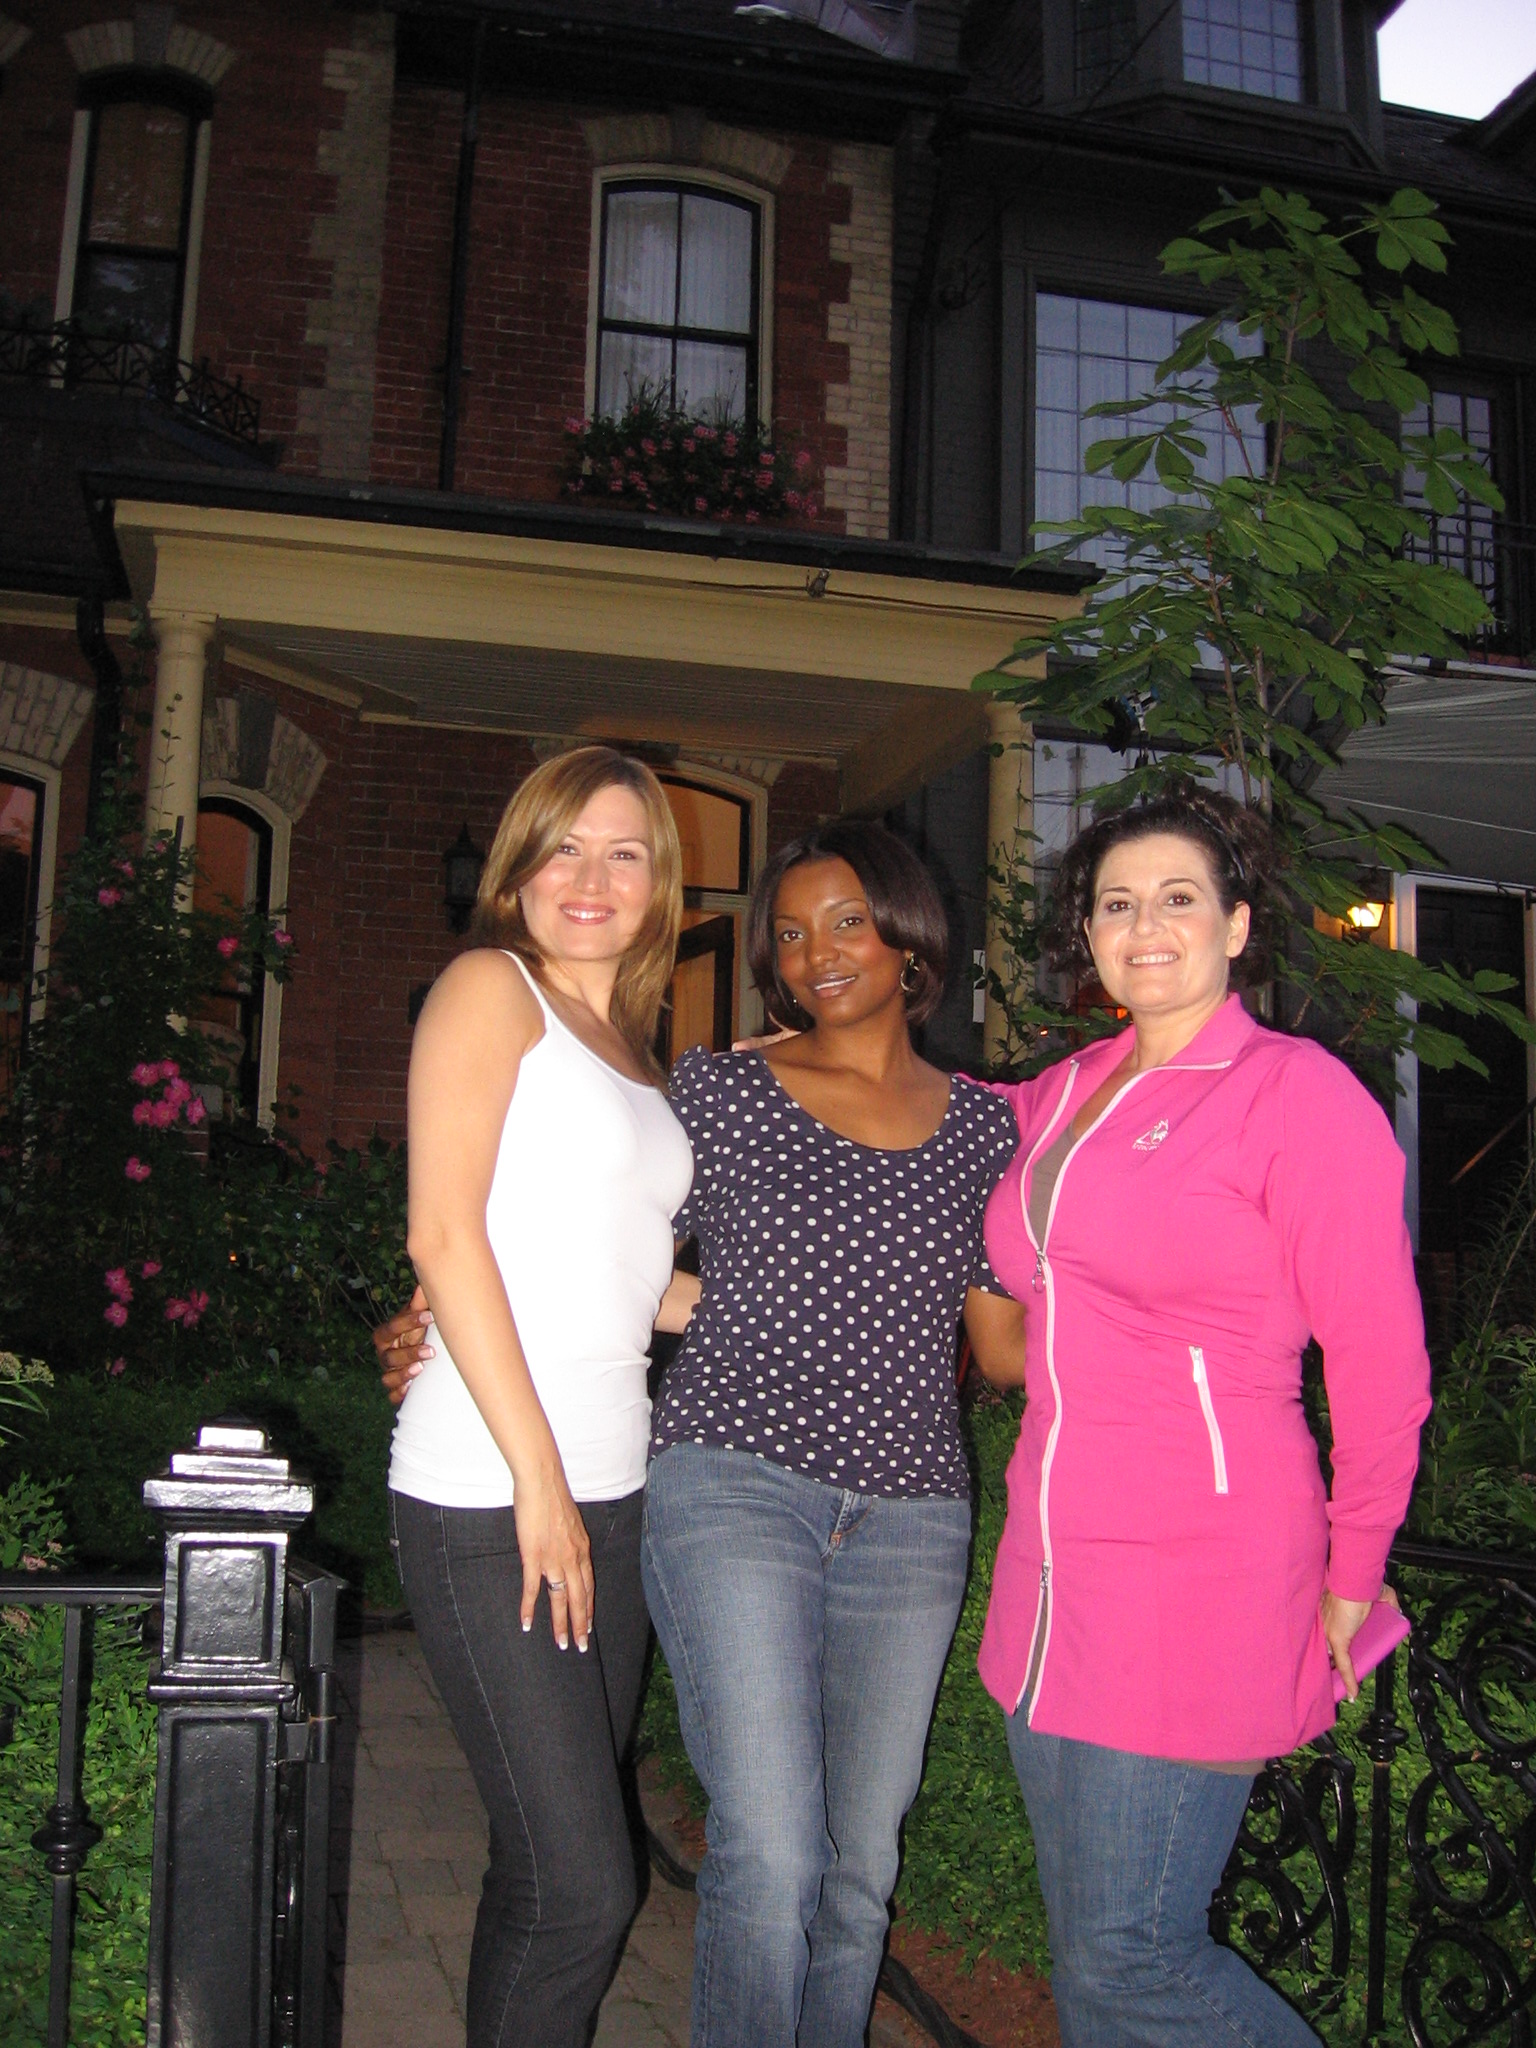 Raven Cinello on set with Tania Kolar and Sherry Marshall shooting a Cadbury Clusters Commercial..